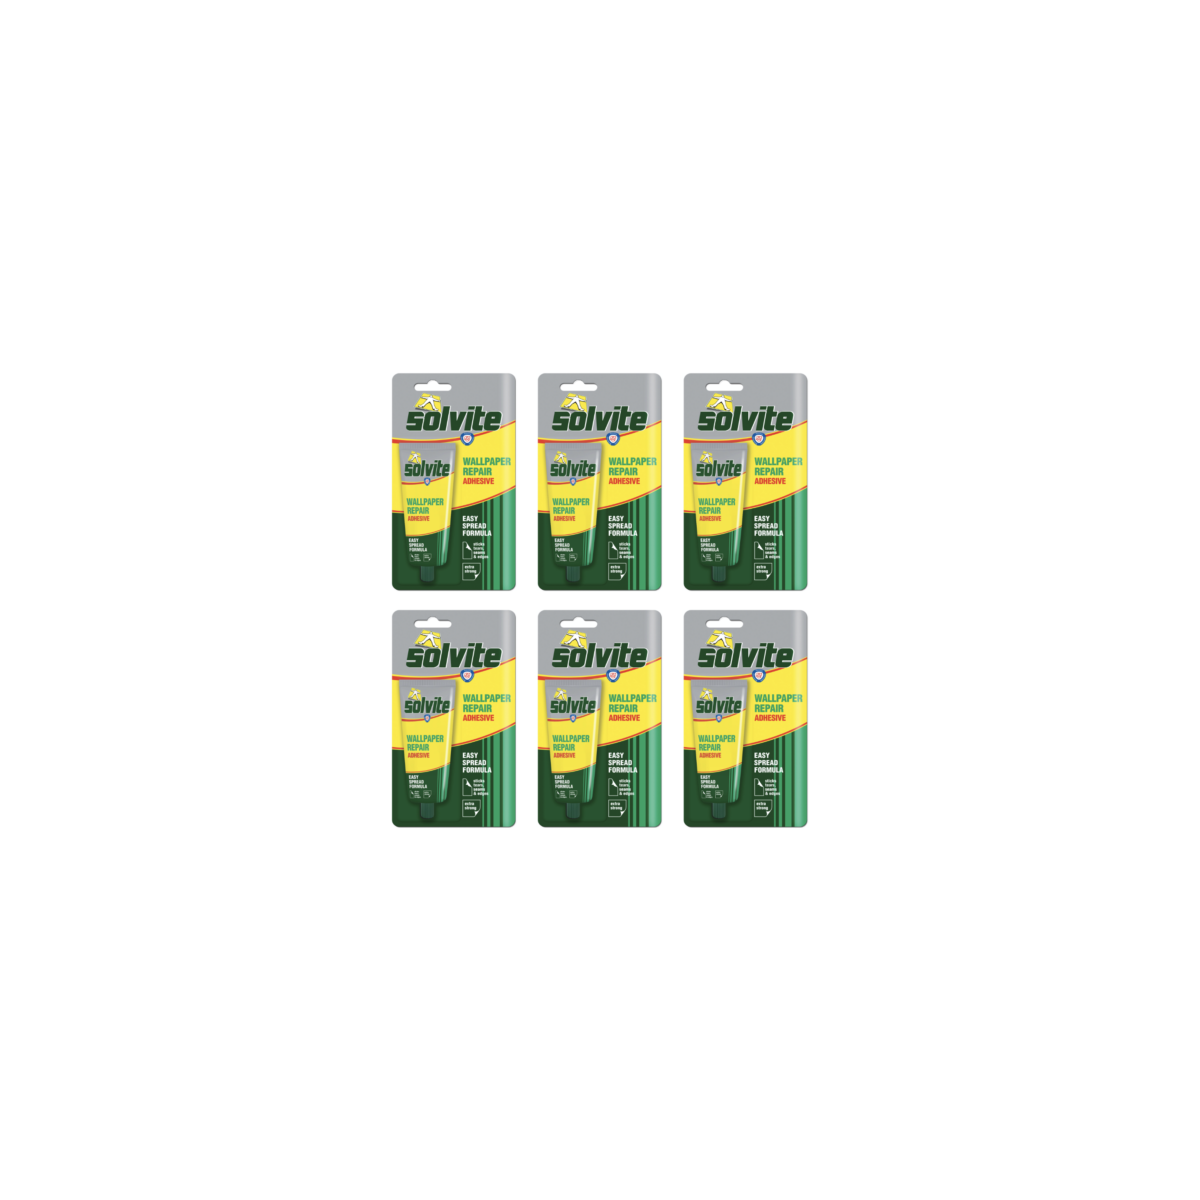 Case of 6 x Solvite Wallpaper Repair Adhesive Extra Strong 56g